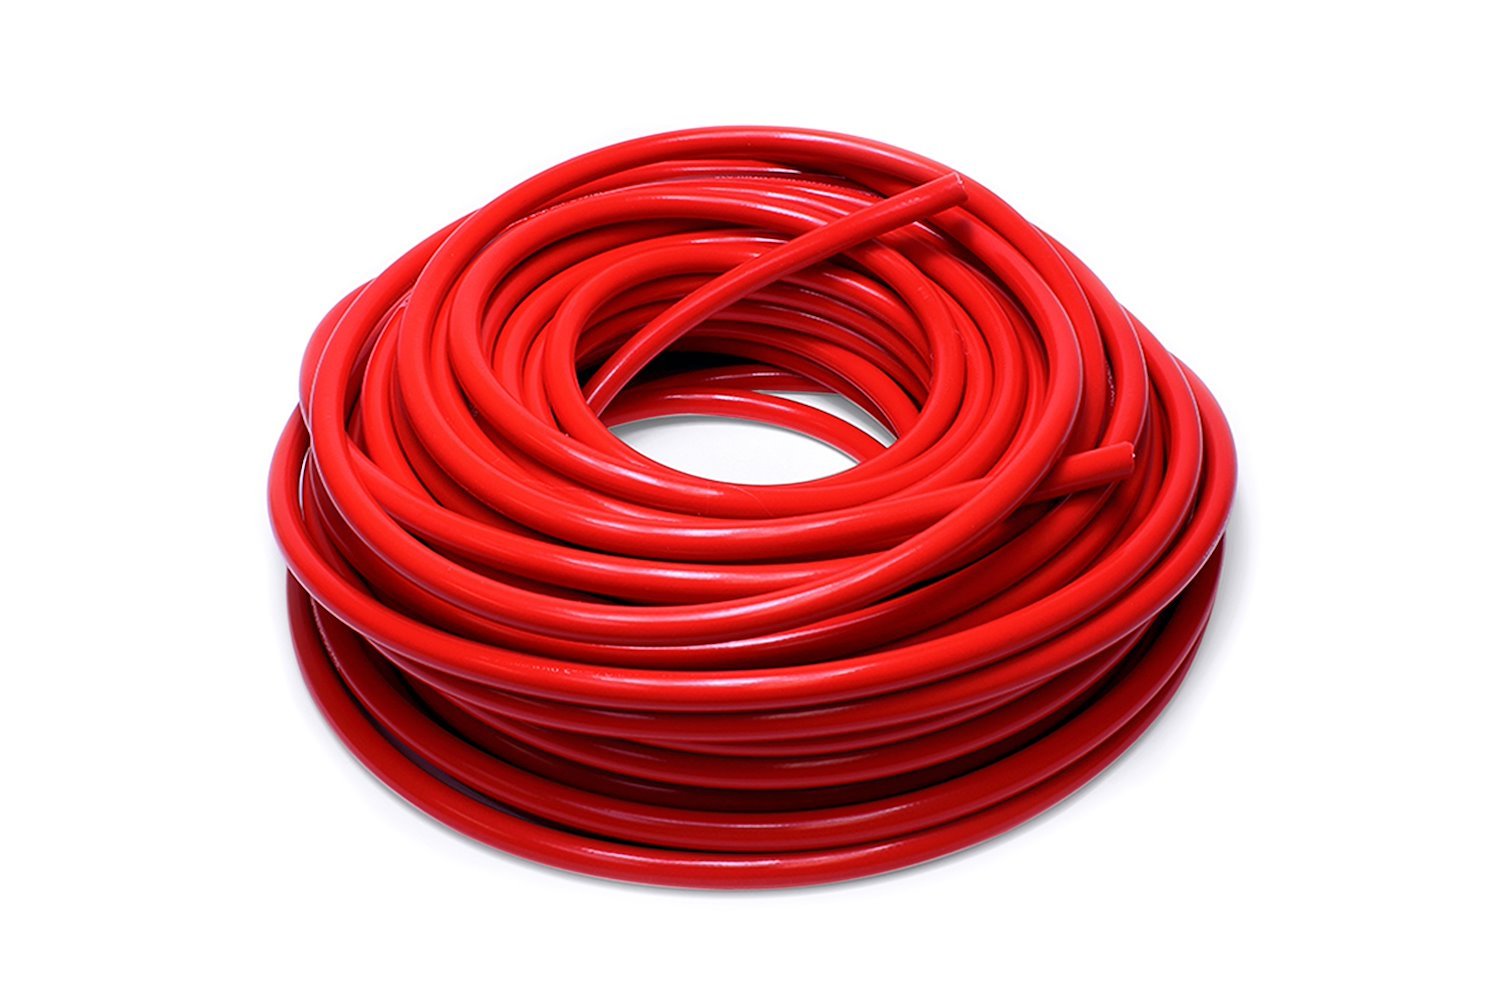 HTHH-100-REDx50 Silicone Heater Hose Tubing, High-Temp 1-Ply Reinforced, 1 in. ID, 50 ft. Roll, Red